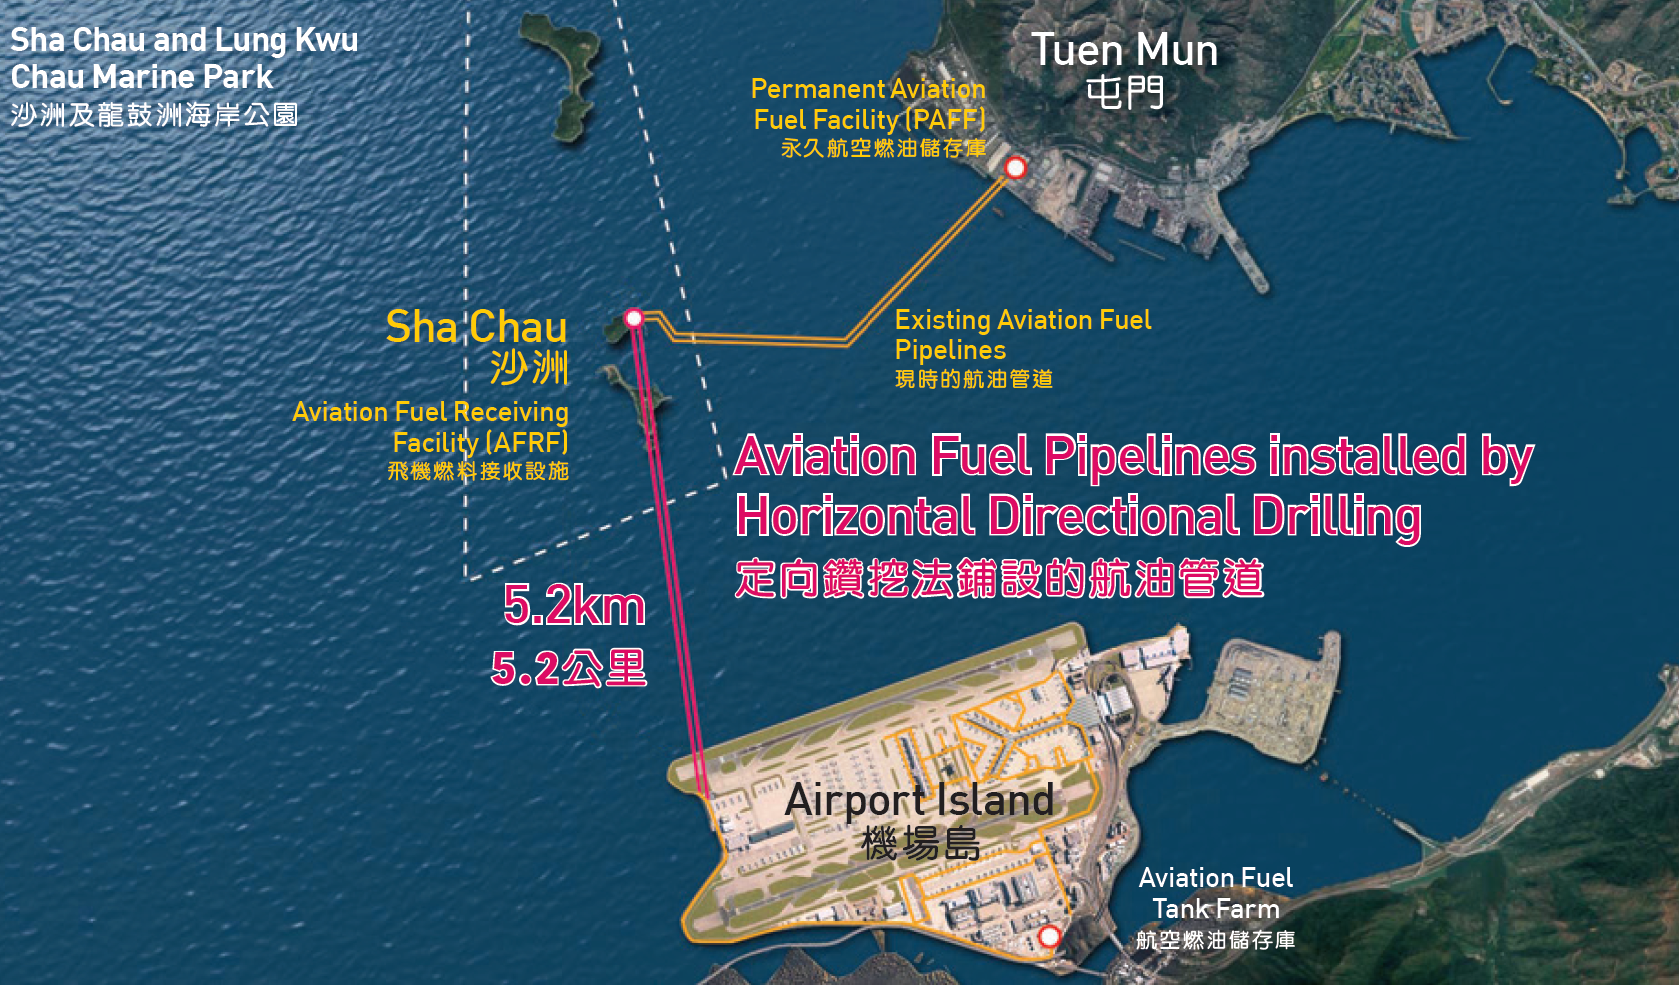 The two 5.2km new aviation fuel pipelines (in red) connect the Airport Island and the Aviation Fuel Receiving Facility at Sha Chau.